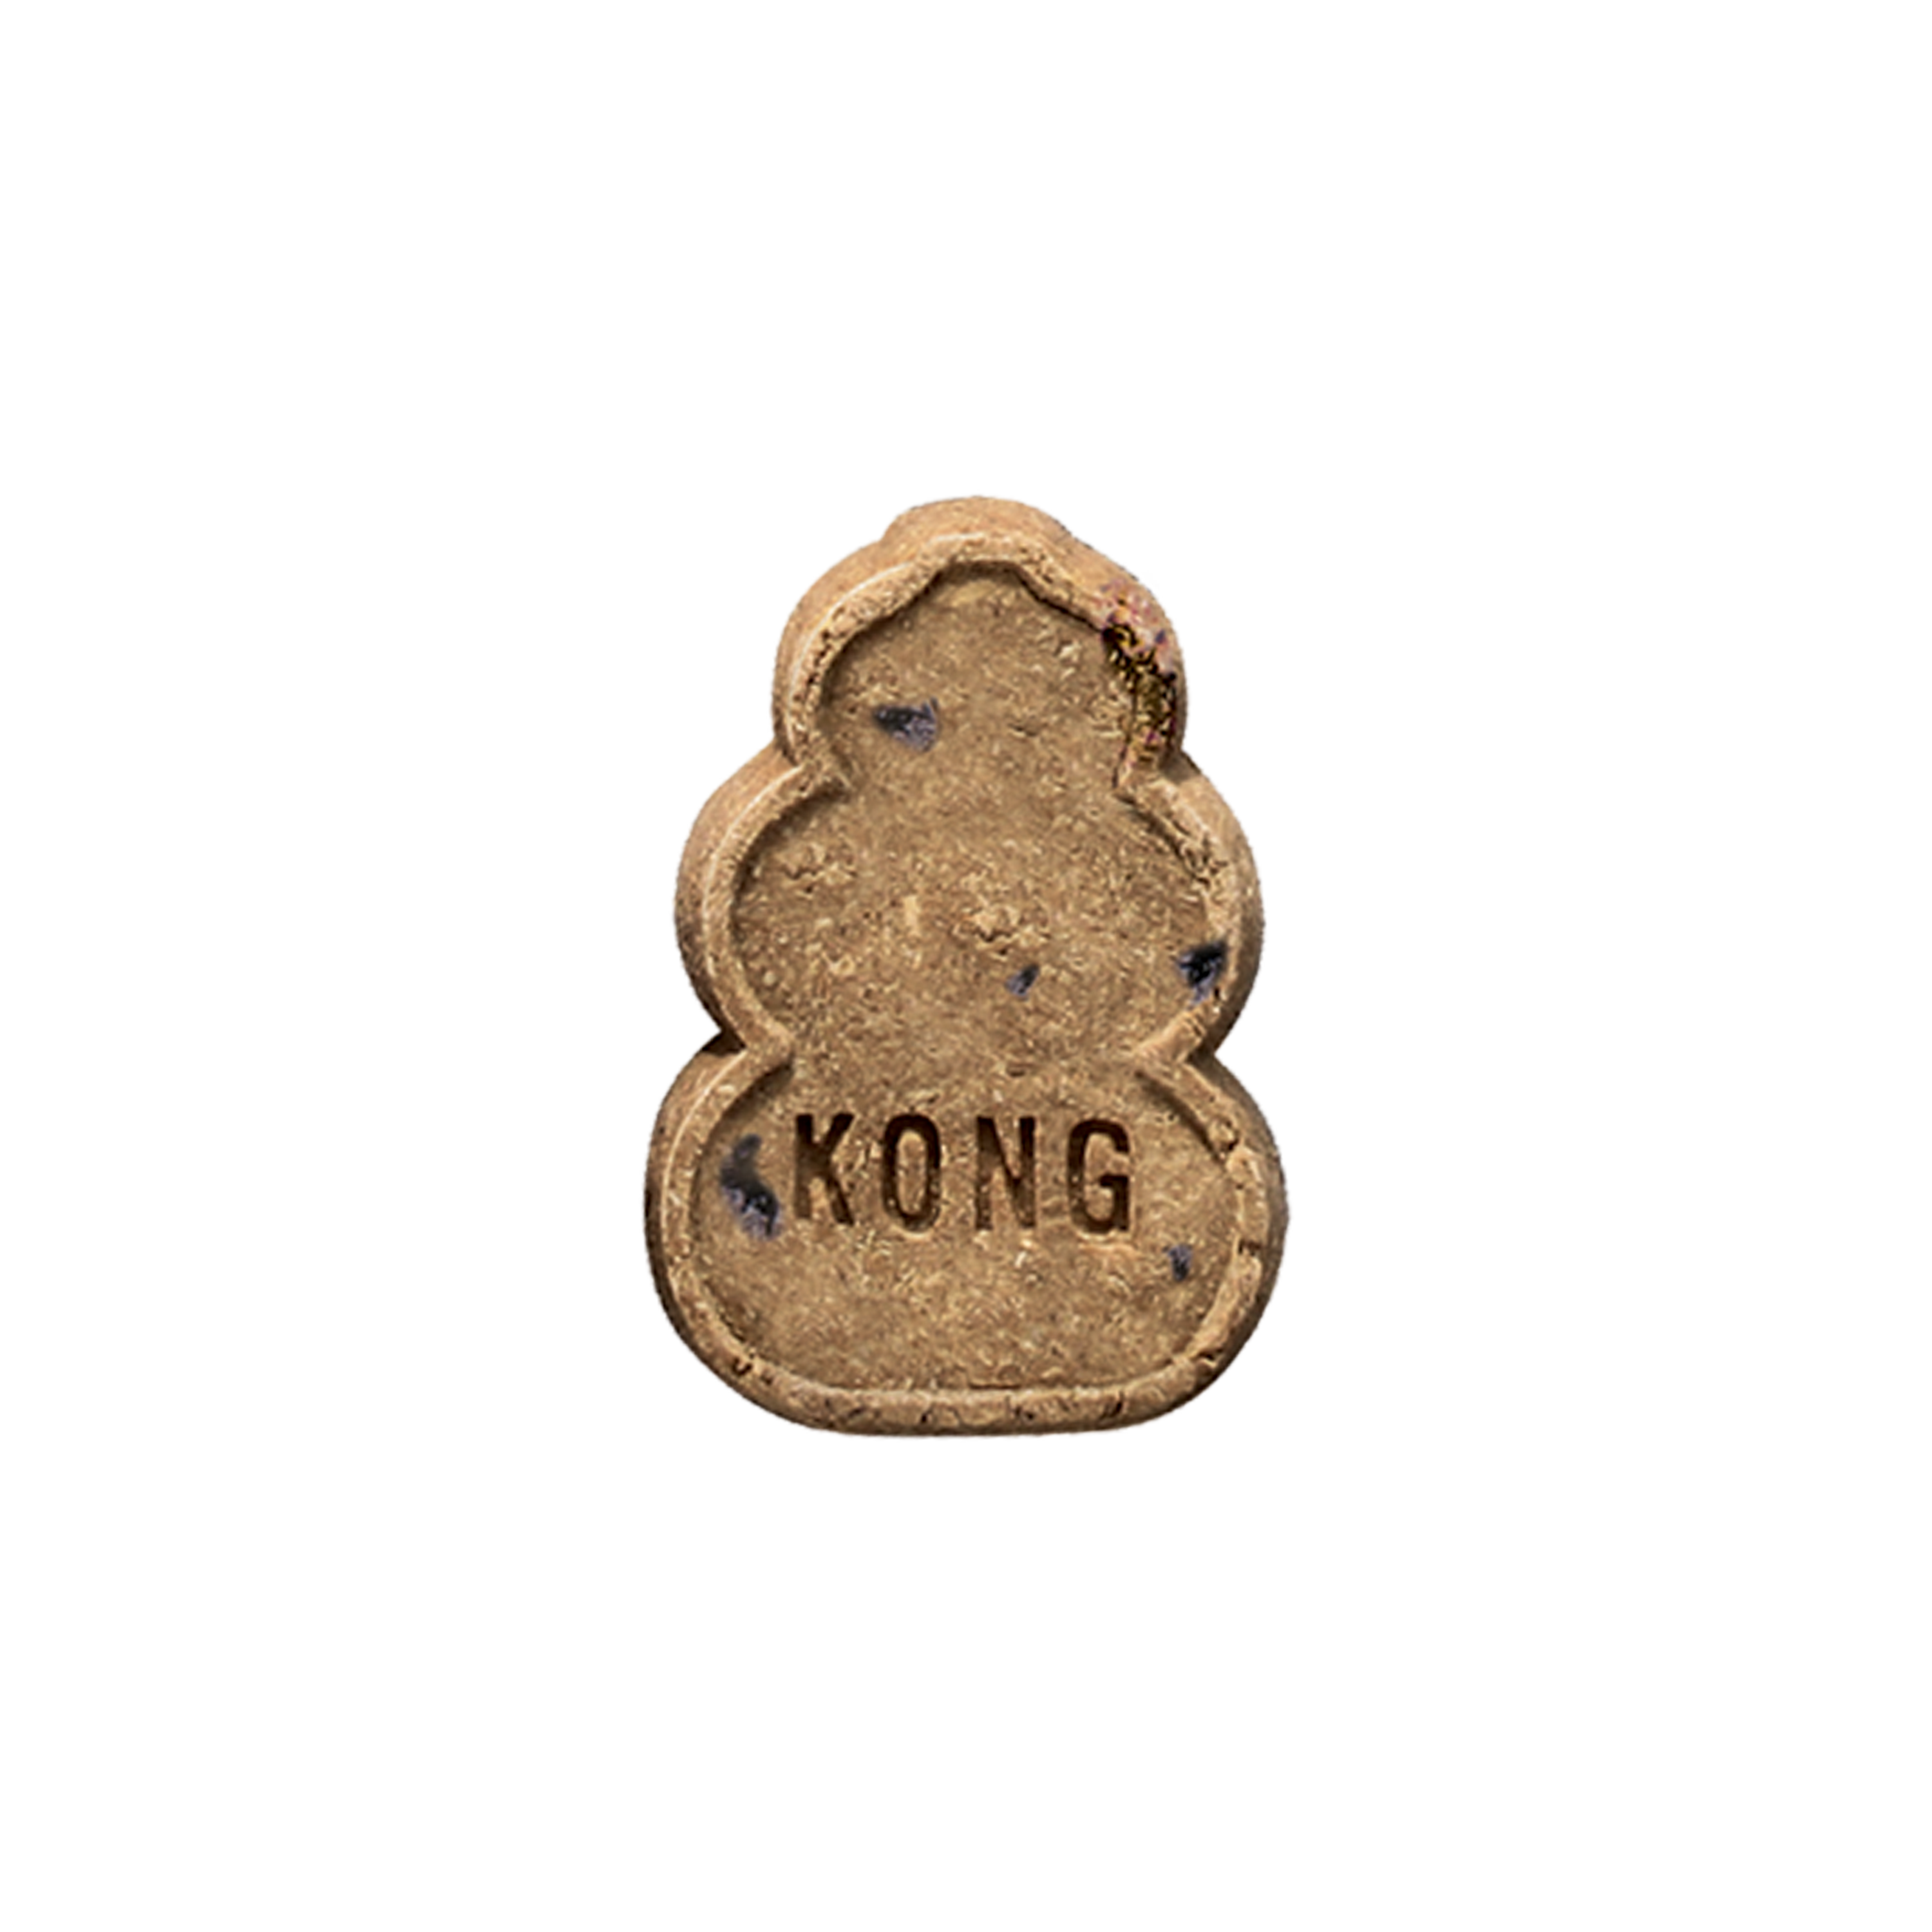 KONG Classic & Easy Treat Peanut Butter – The Good Stuff Unlimited